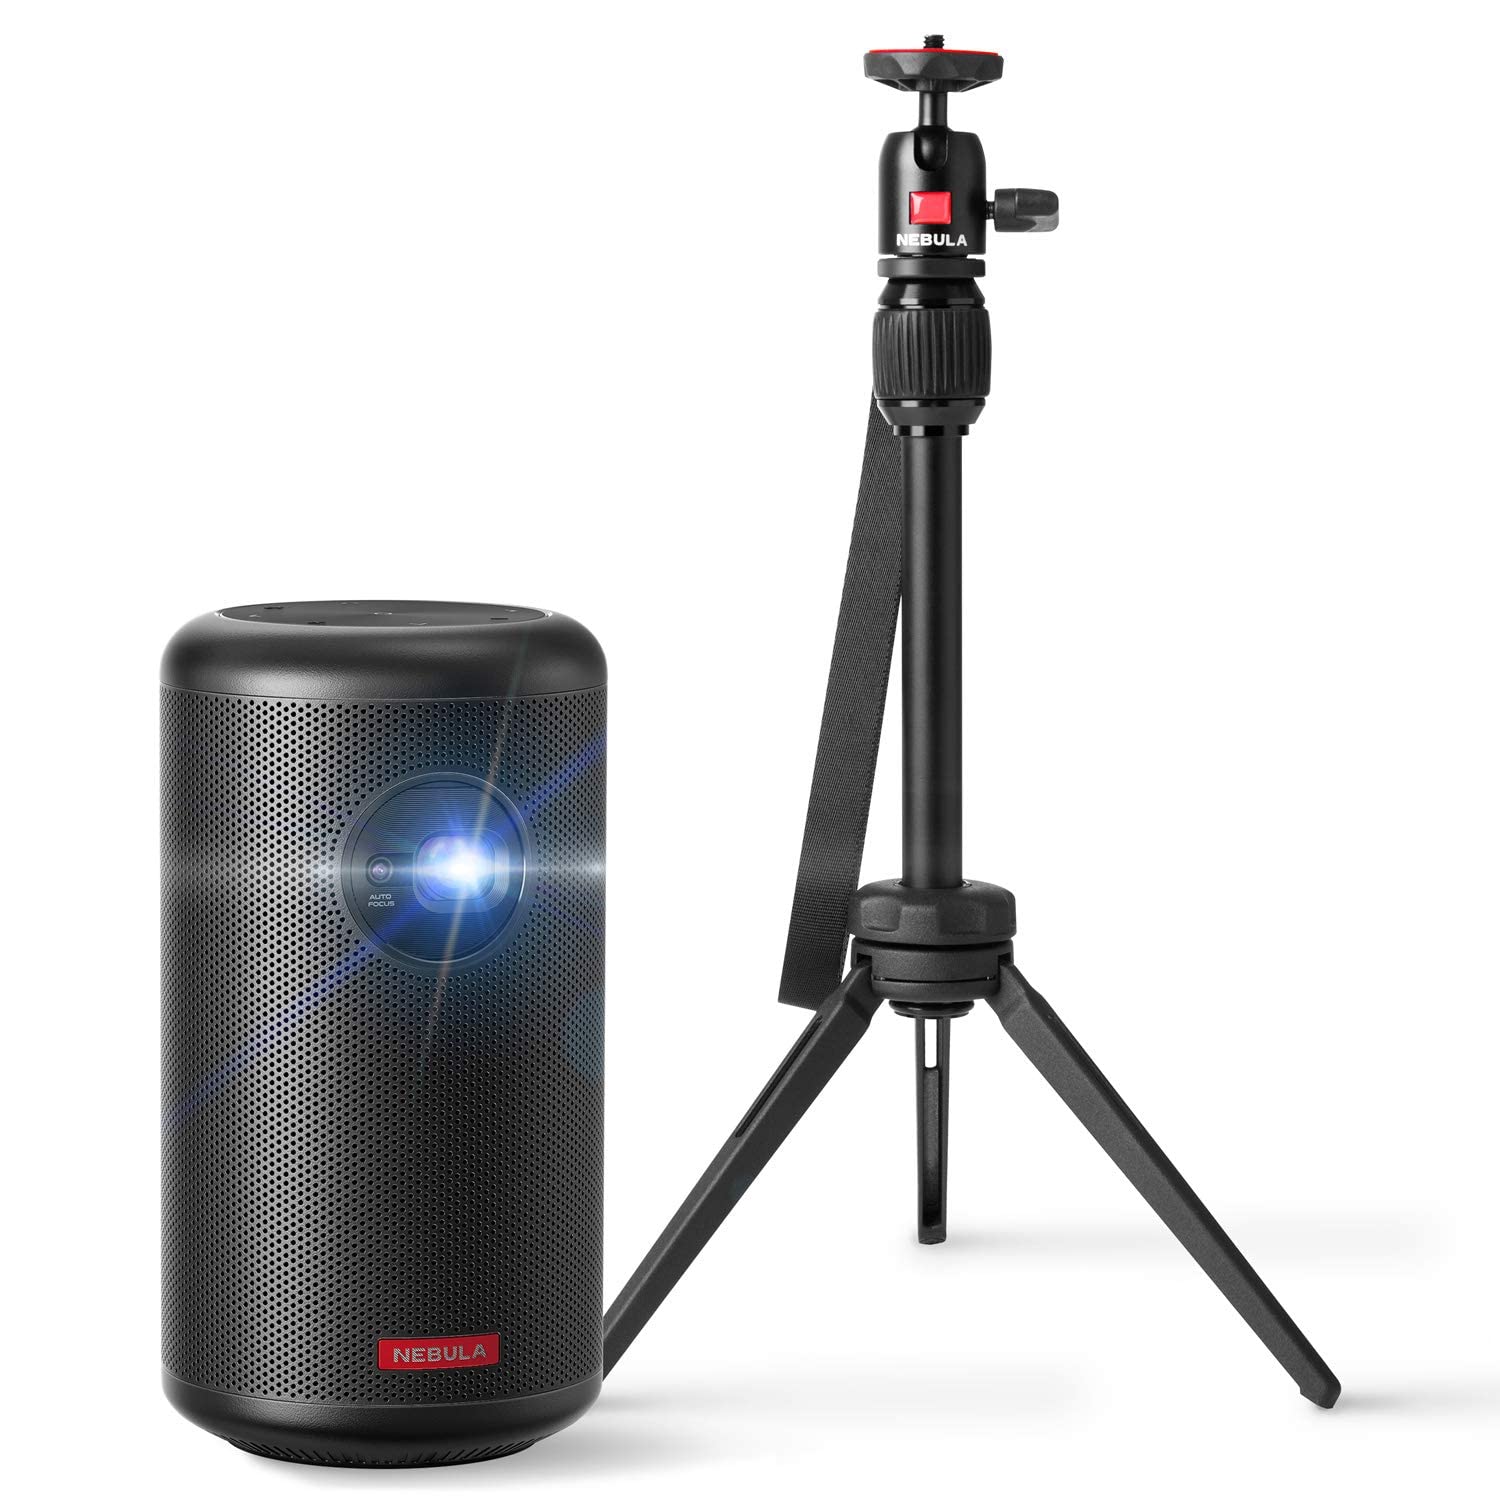 Anker Nebula Capsule Max with Anker Nebula Capsule Series Adjustable Tripod Stand, Aluminum Alloy Portable Projector Stand